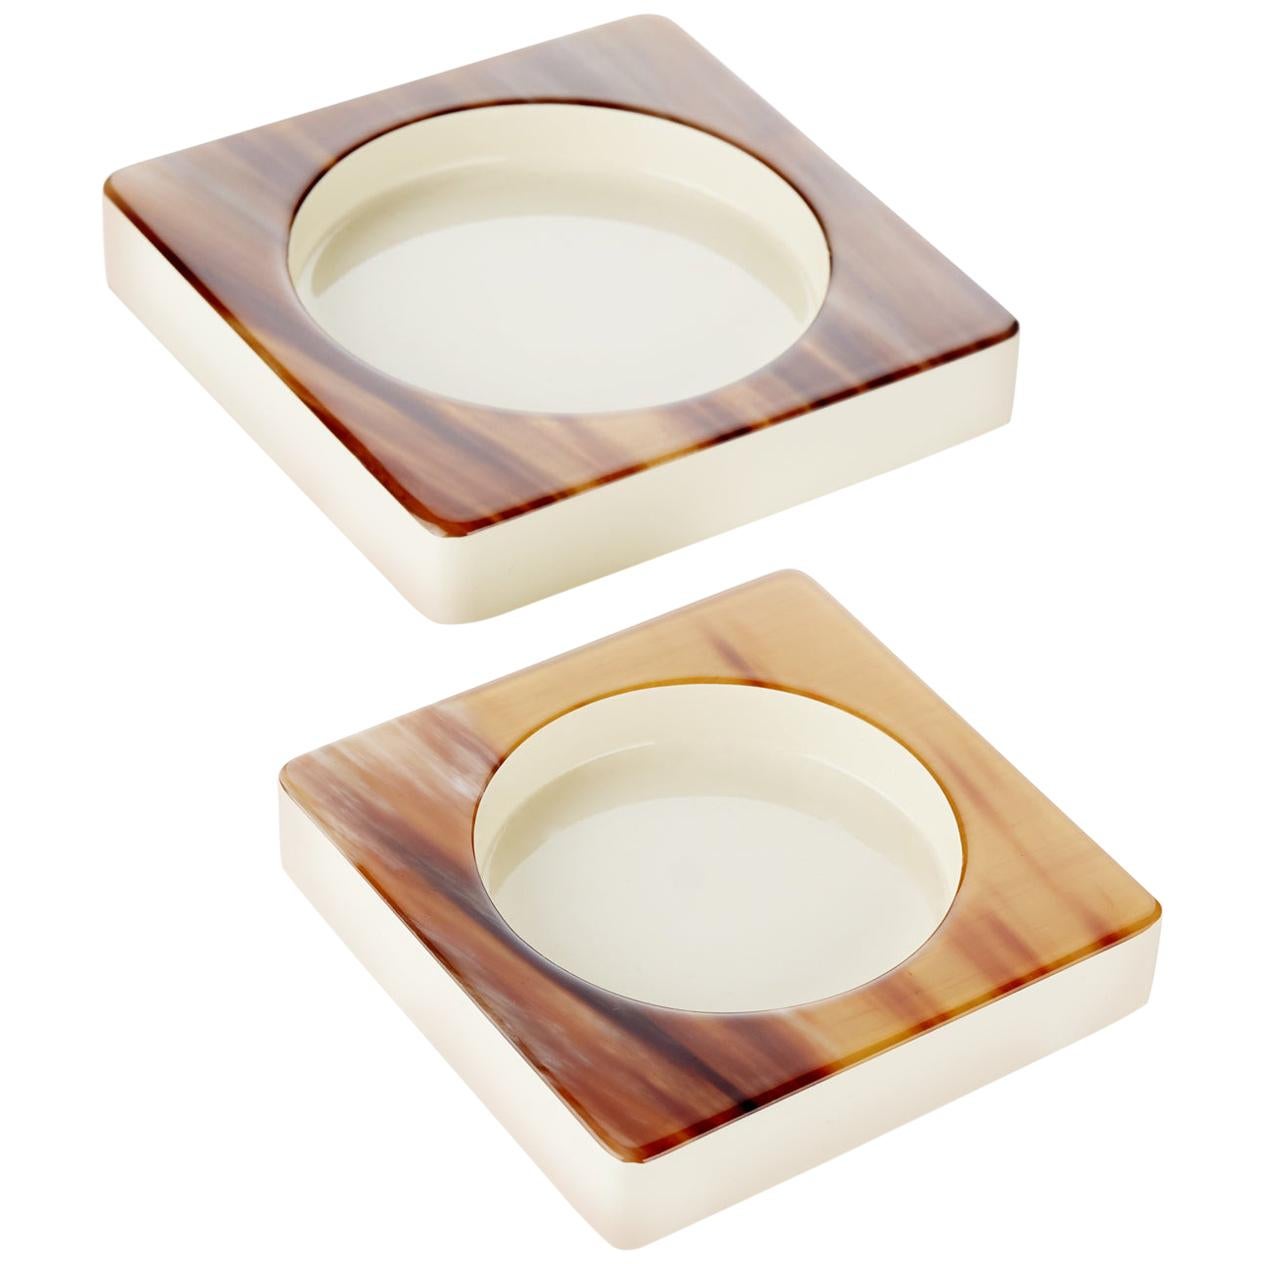 An elegant accompaniment for bottles, this coaster expresses refinement and excellent craftsmanship. Featuring natural Corno Italiano and lacquered wood with cream-colored finish, each piece presents its own unique texture, color and tone. Proposed